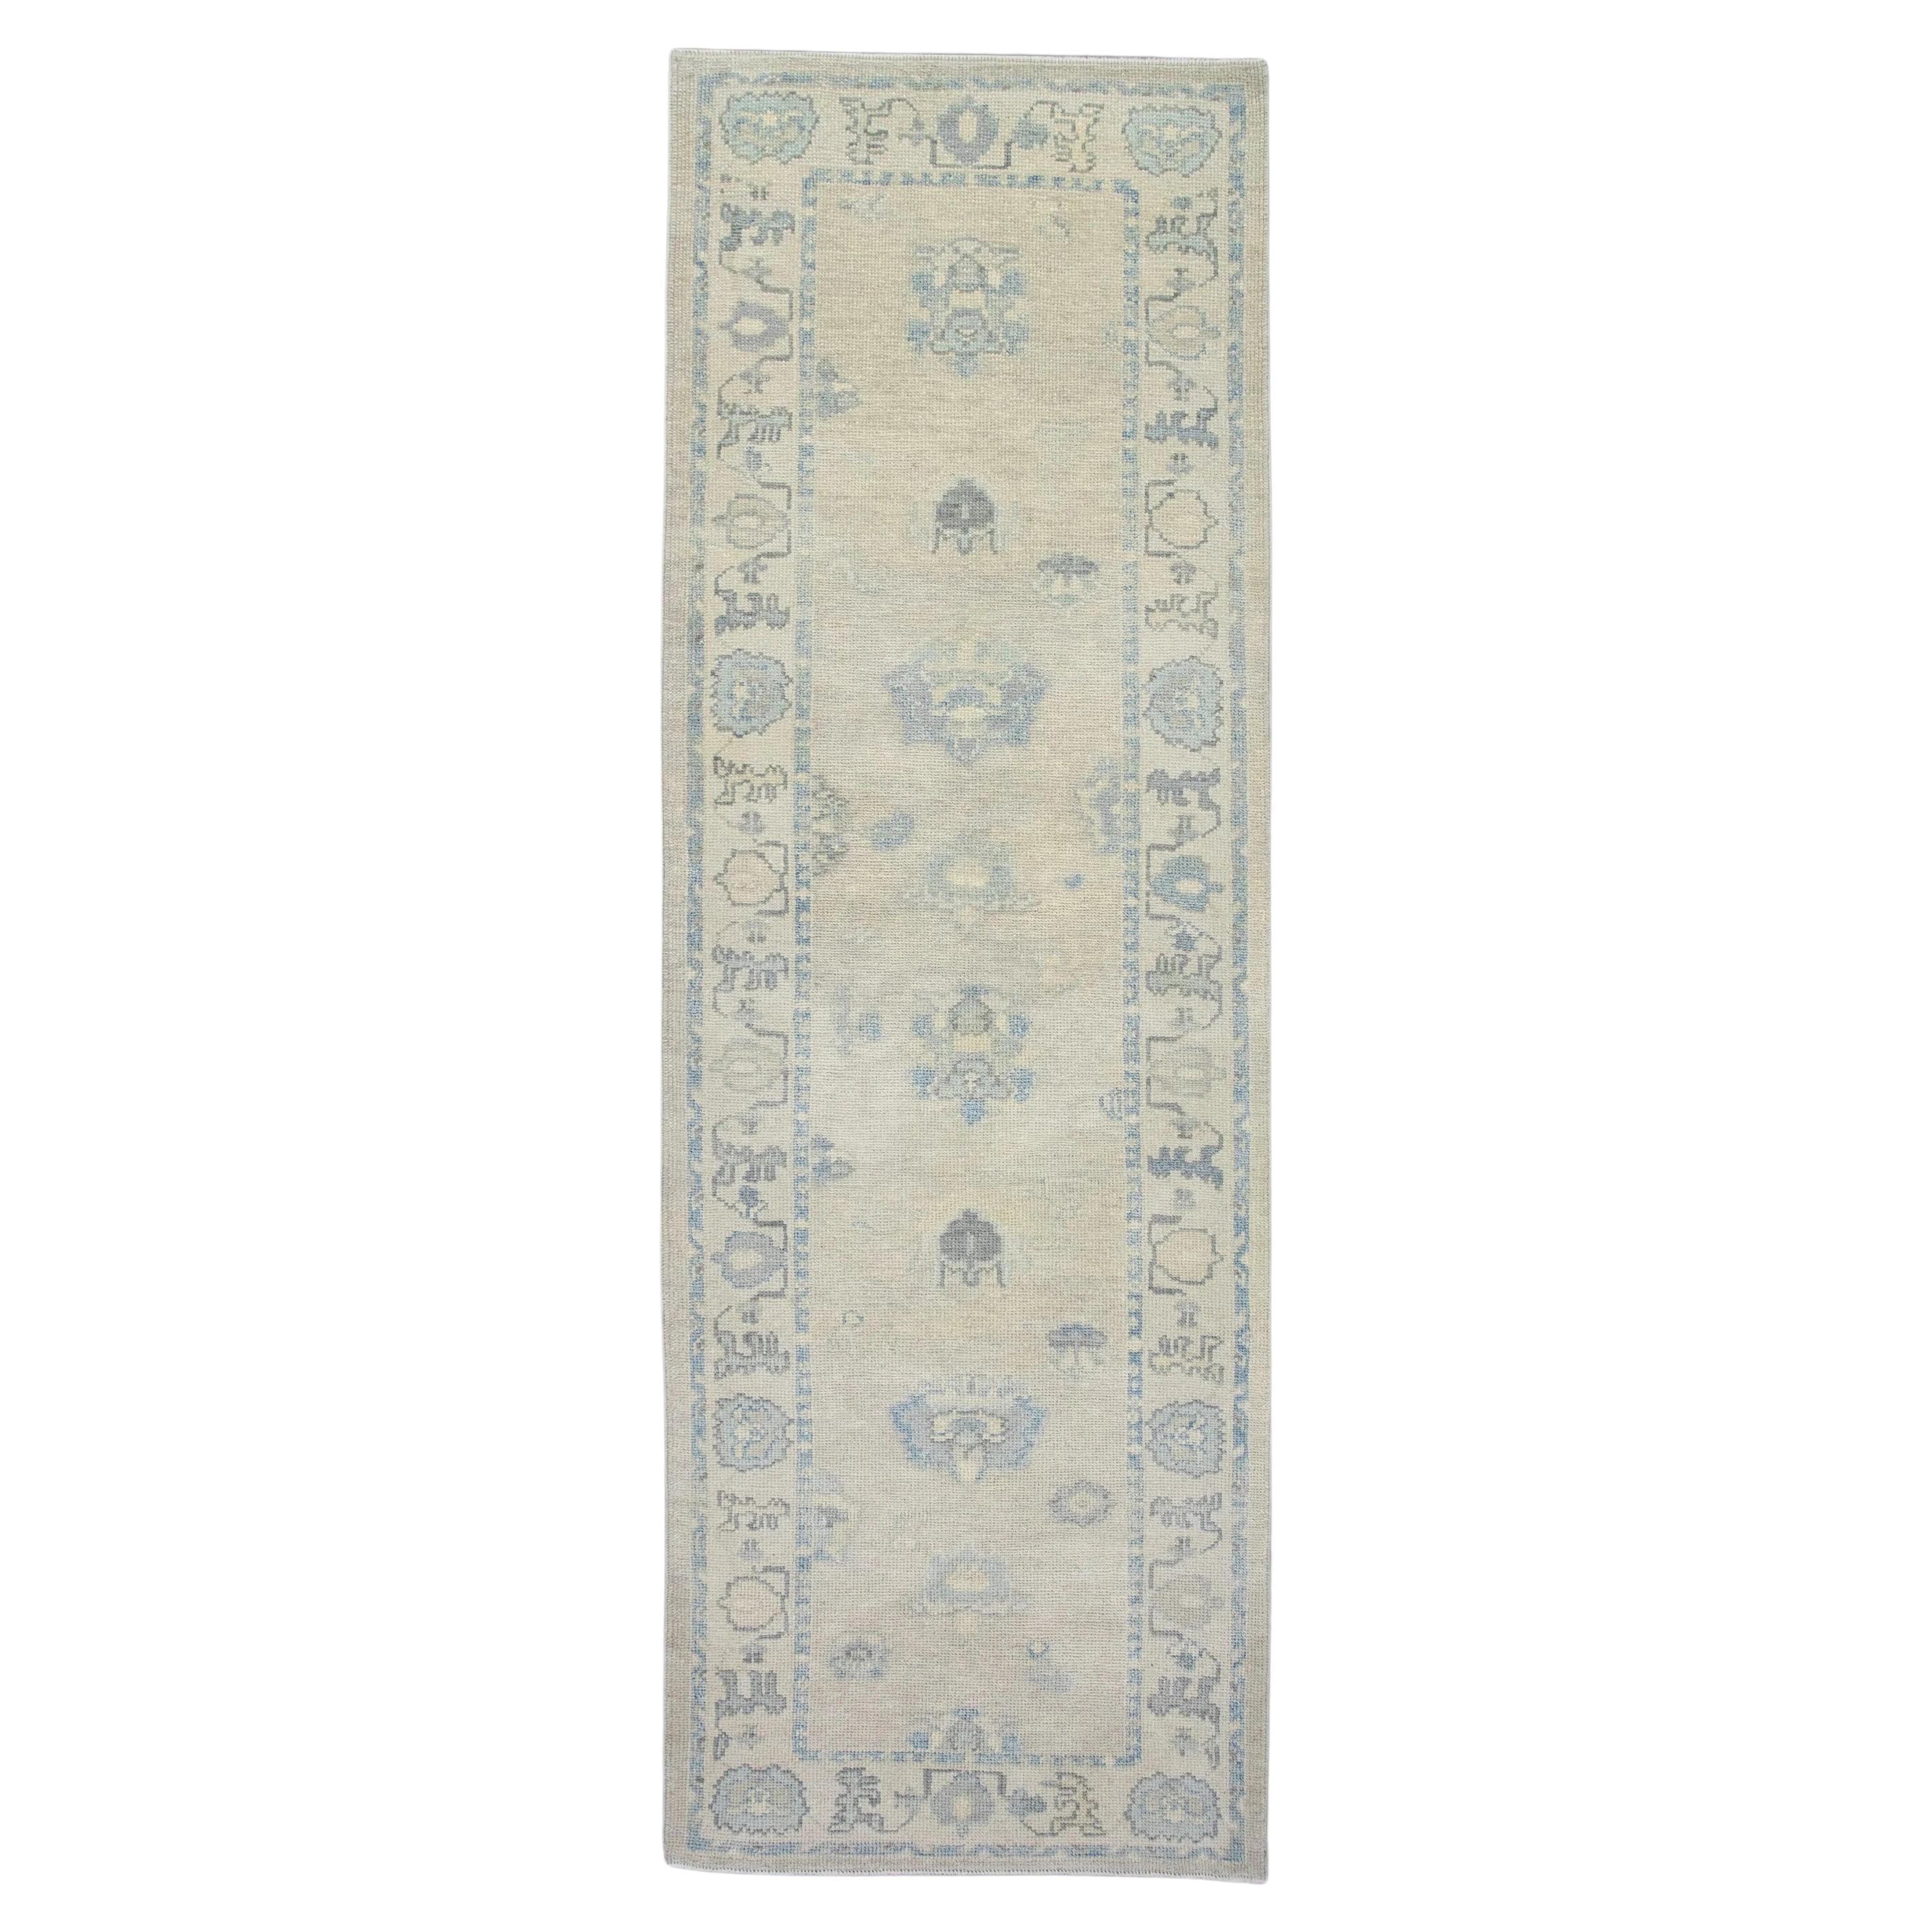 Floral Handwoven Wool Turkish Oushak Rug in Cream and Soft Blue 3'2" x 9'9" For Sale